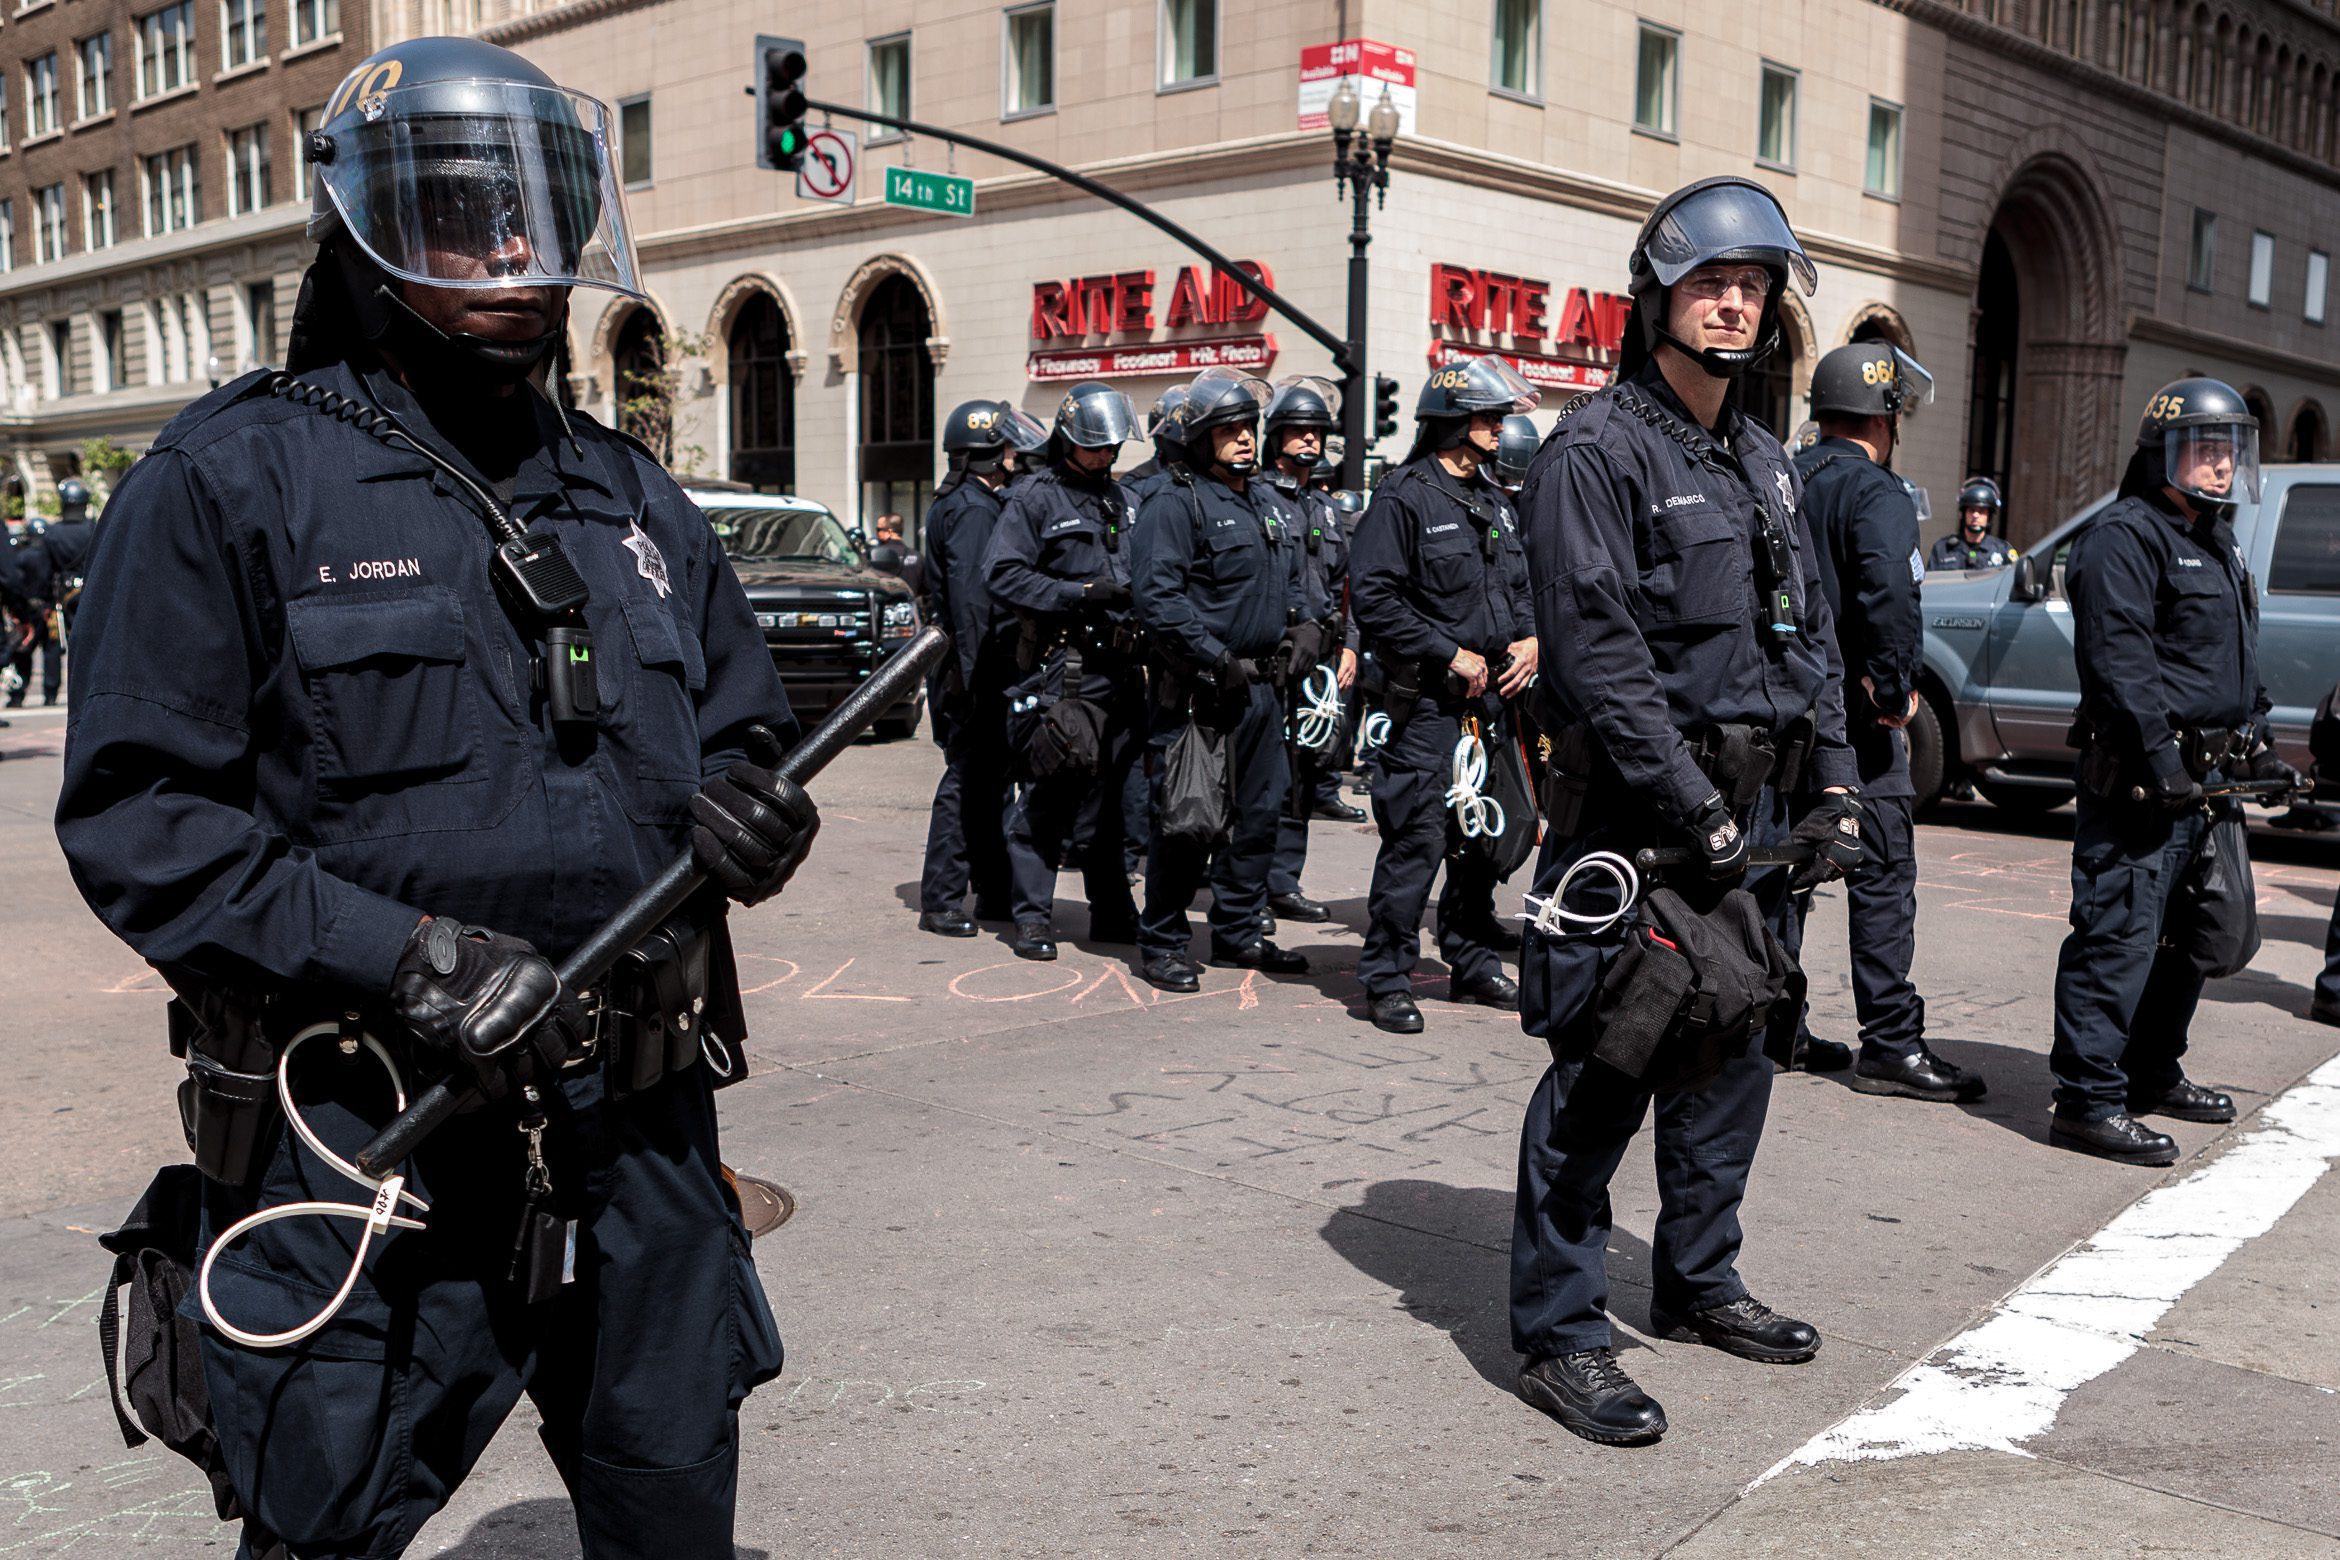 Oakland police officers wearing protective gear stand at 14th and Broadway Streets in Oakland, California during a protest on May 1, 2012.